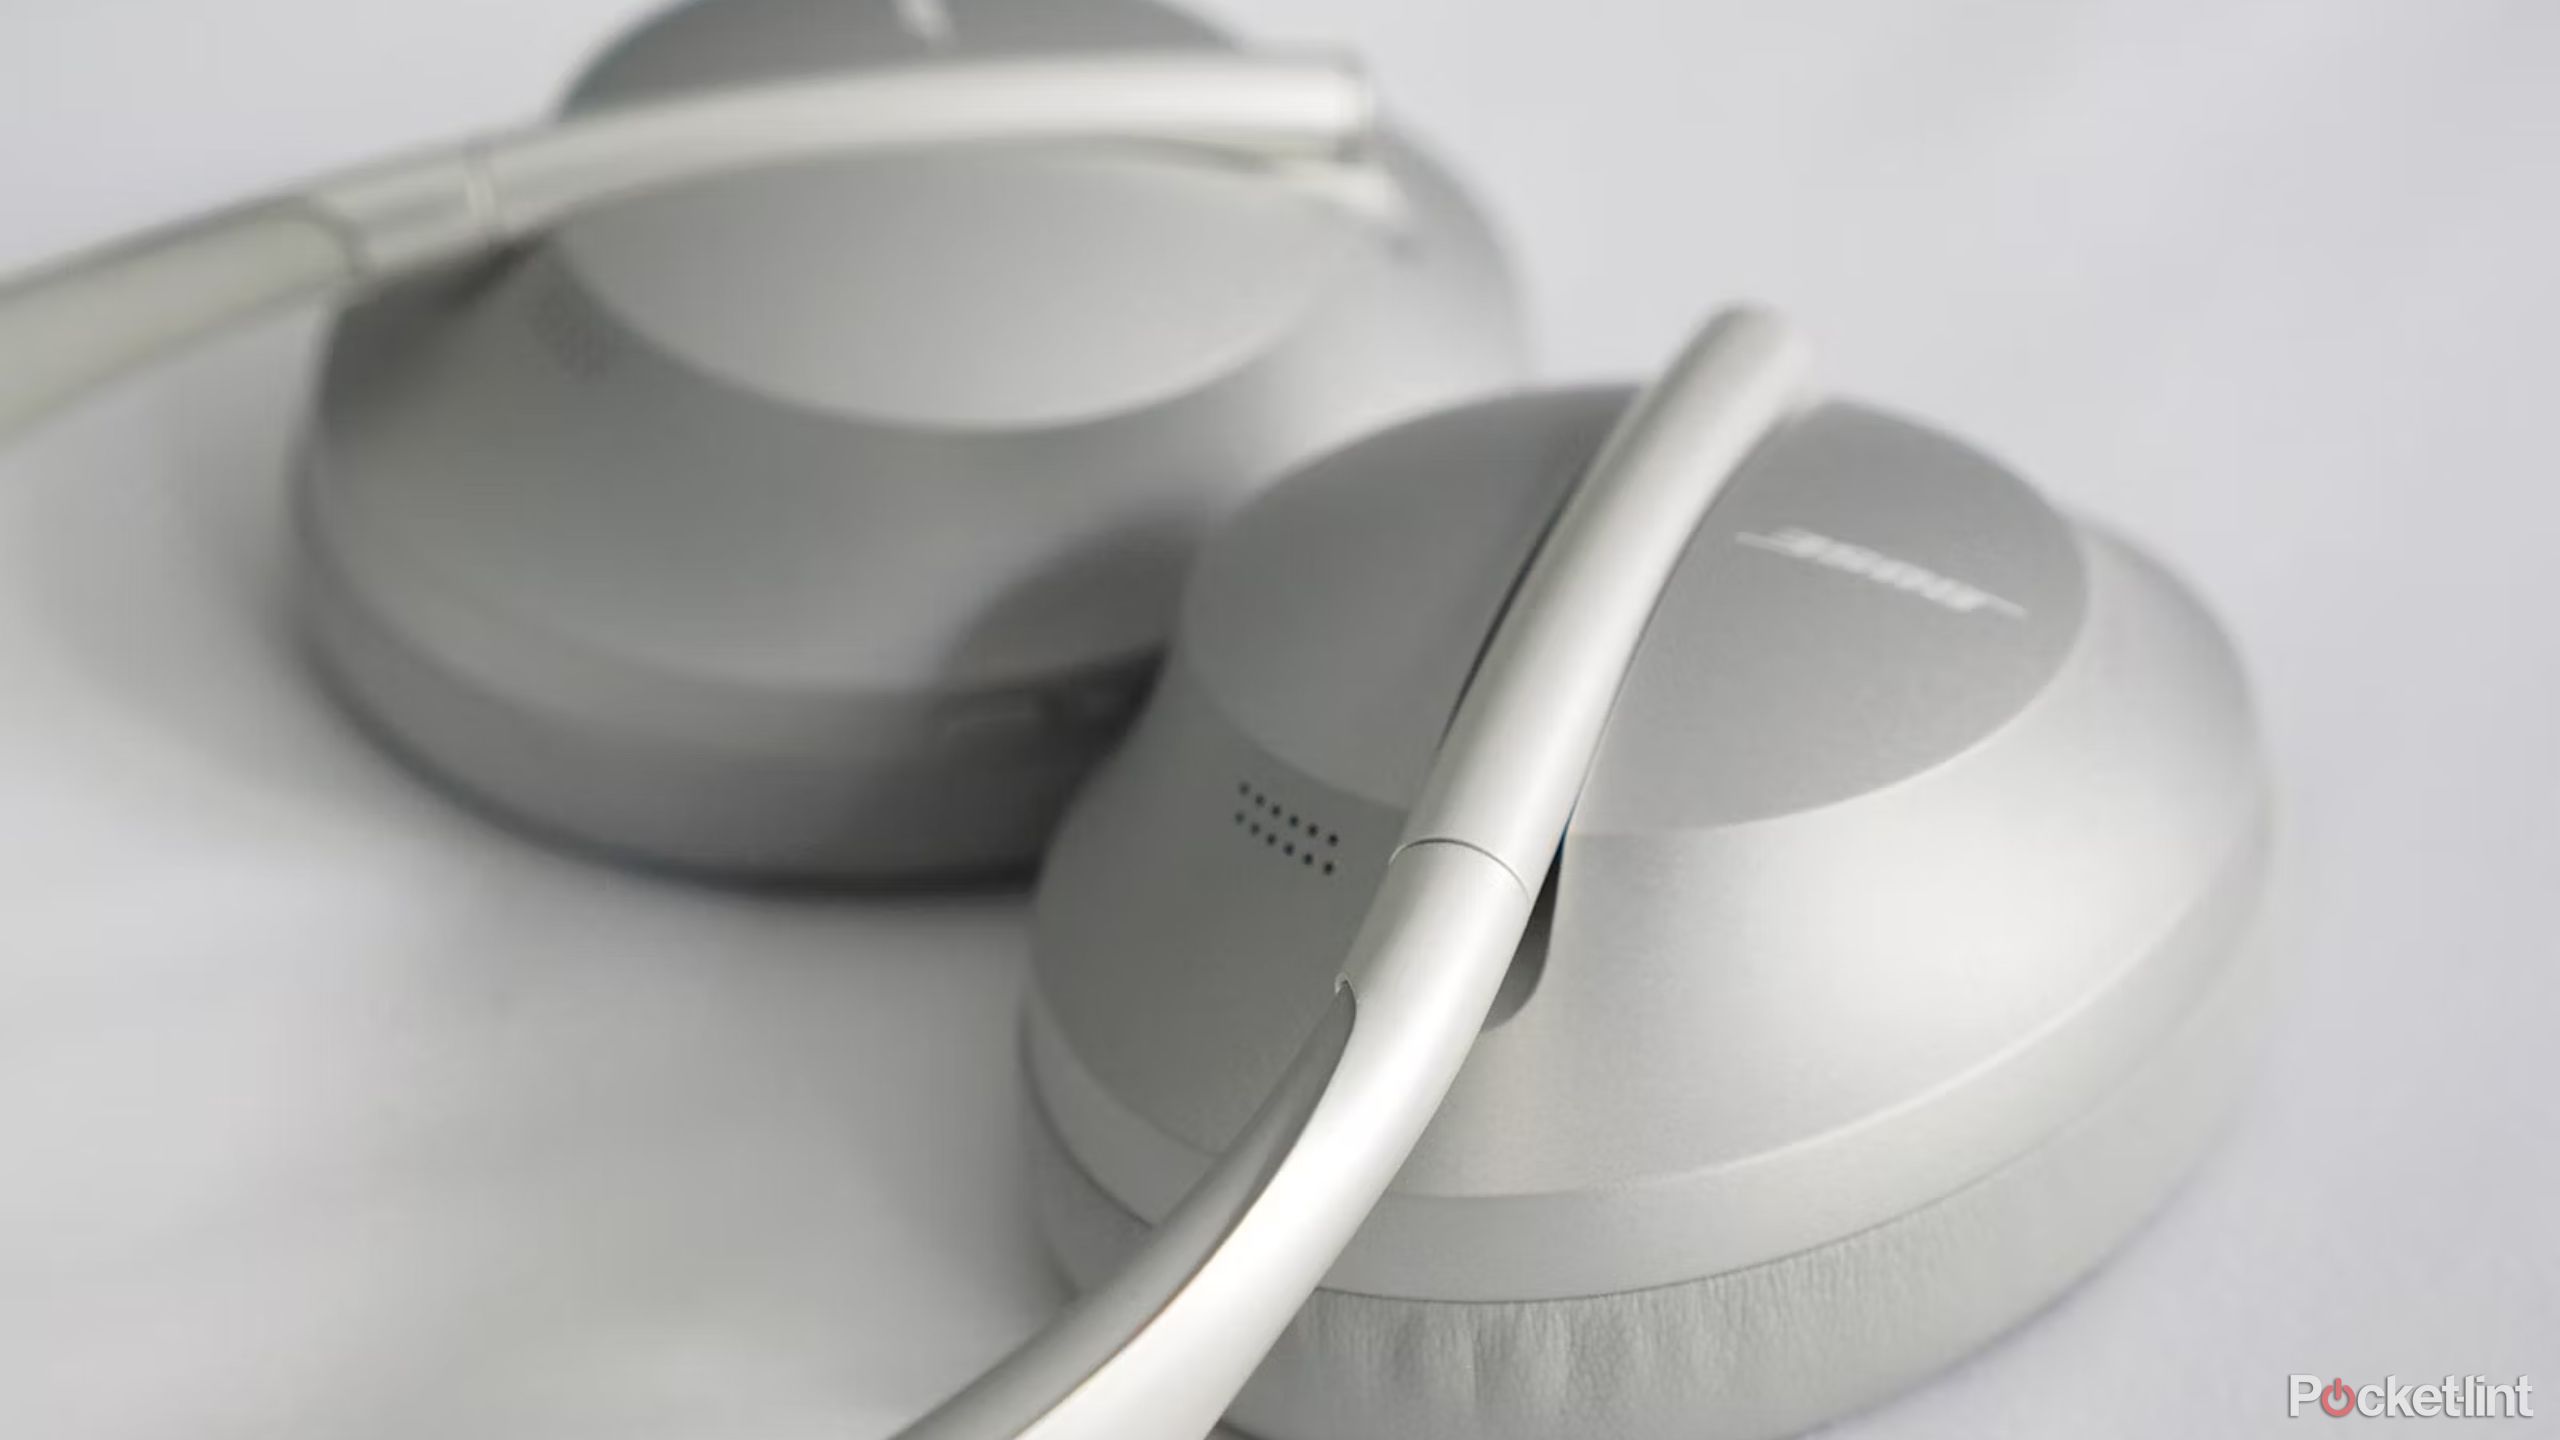 5 reasons to buy Bose NC 700 over AirPods Max